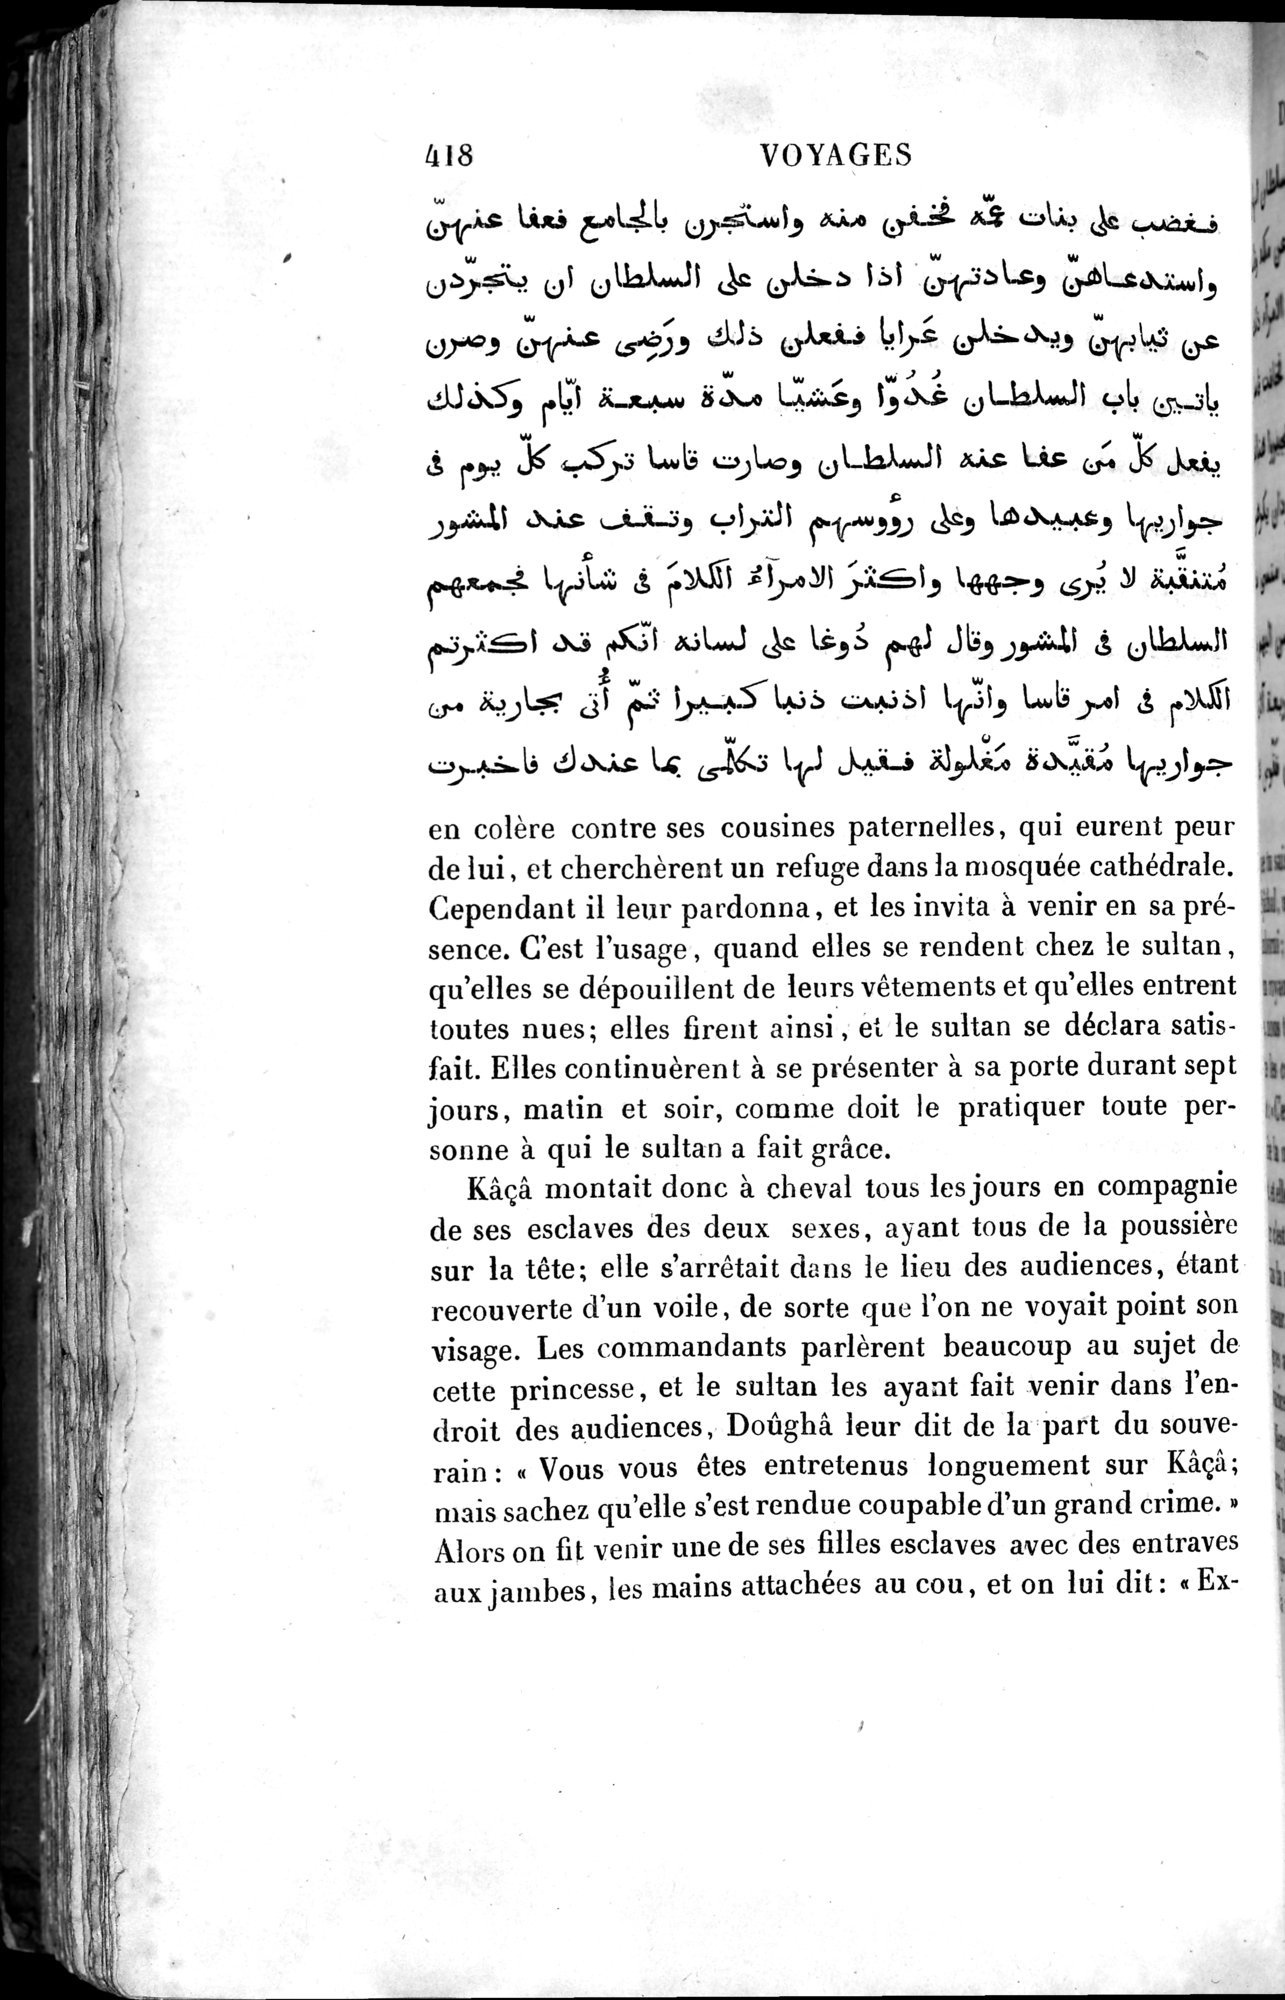 Voyages d'Ibn Batoutah : vol.4 / Page 430 (Grayscale High Resolution Image)